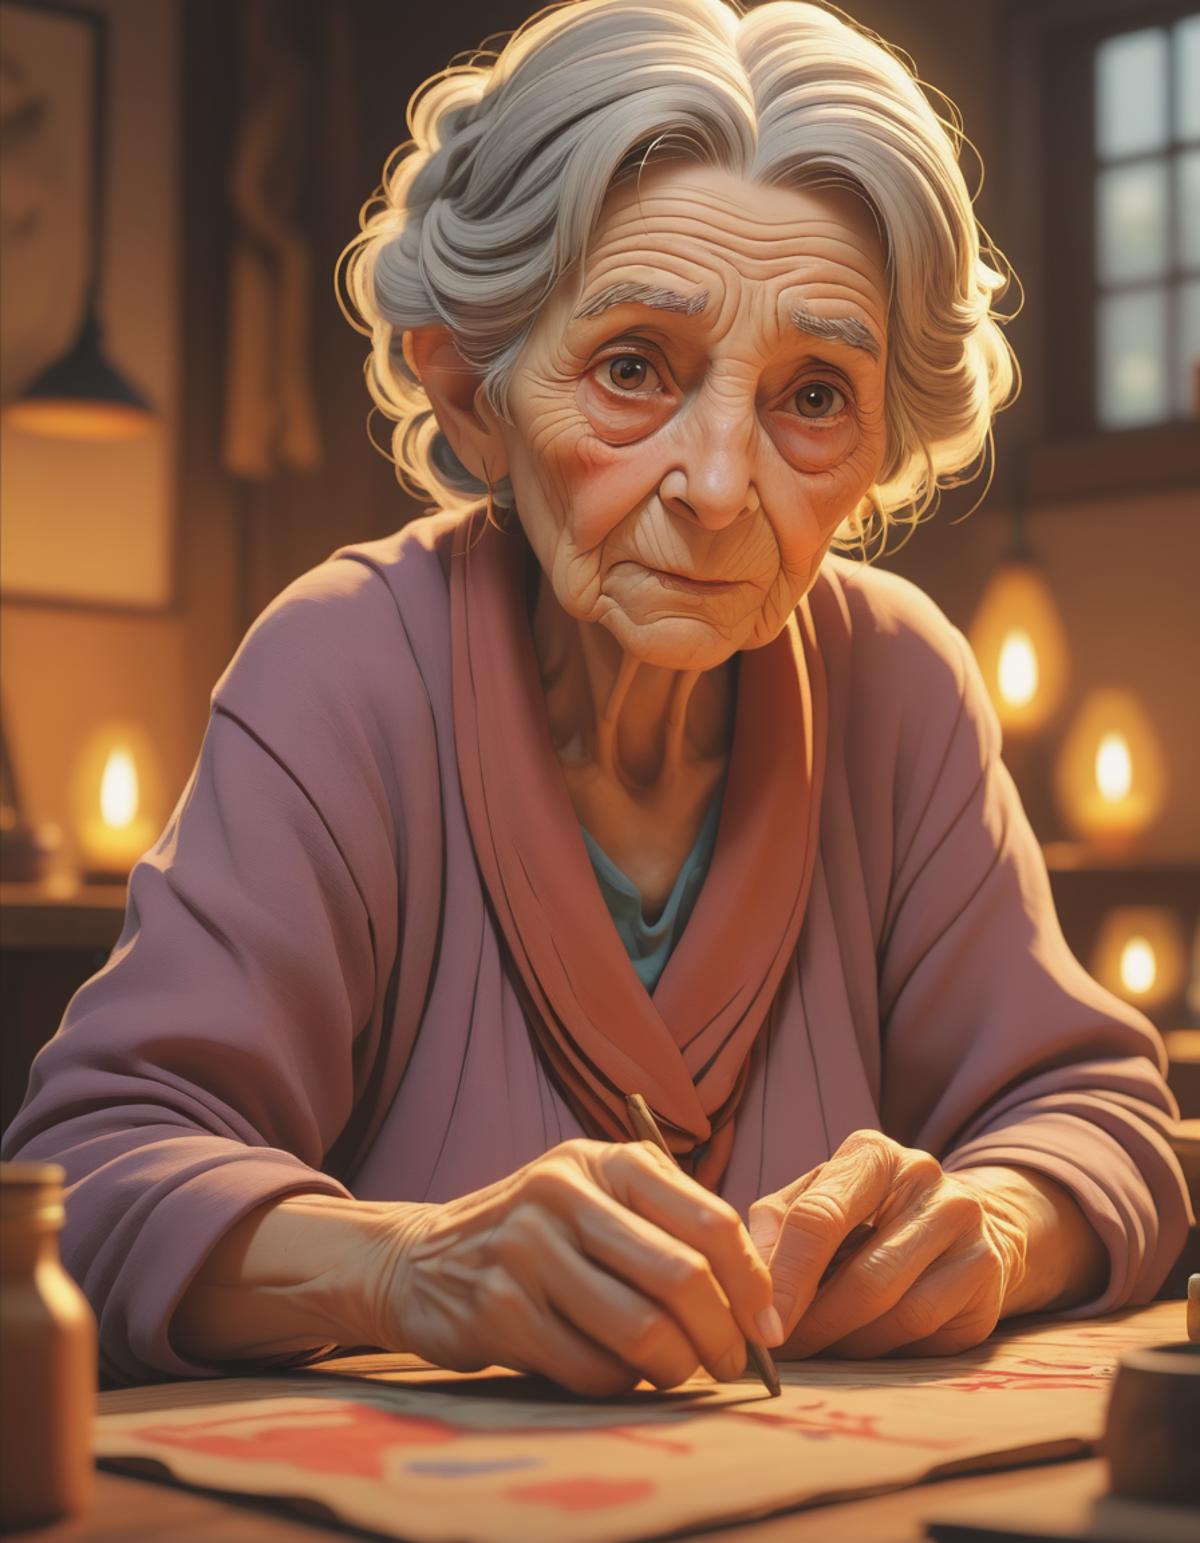 An elderly woman sitting in a chair in a dimly lit room.